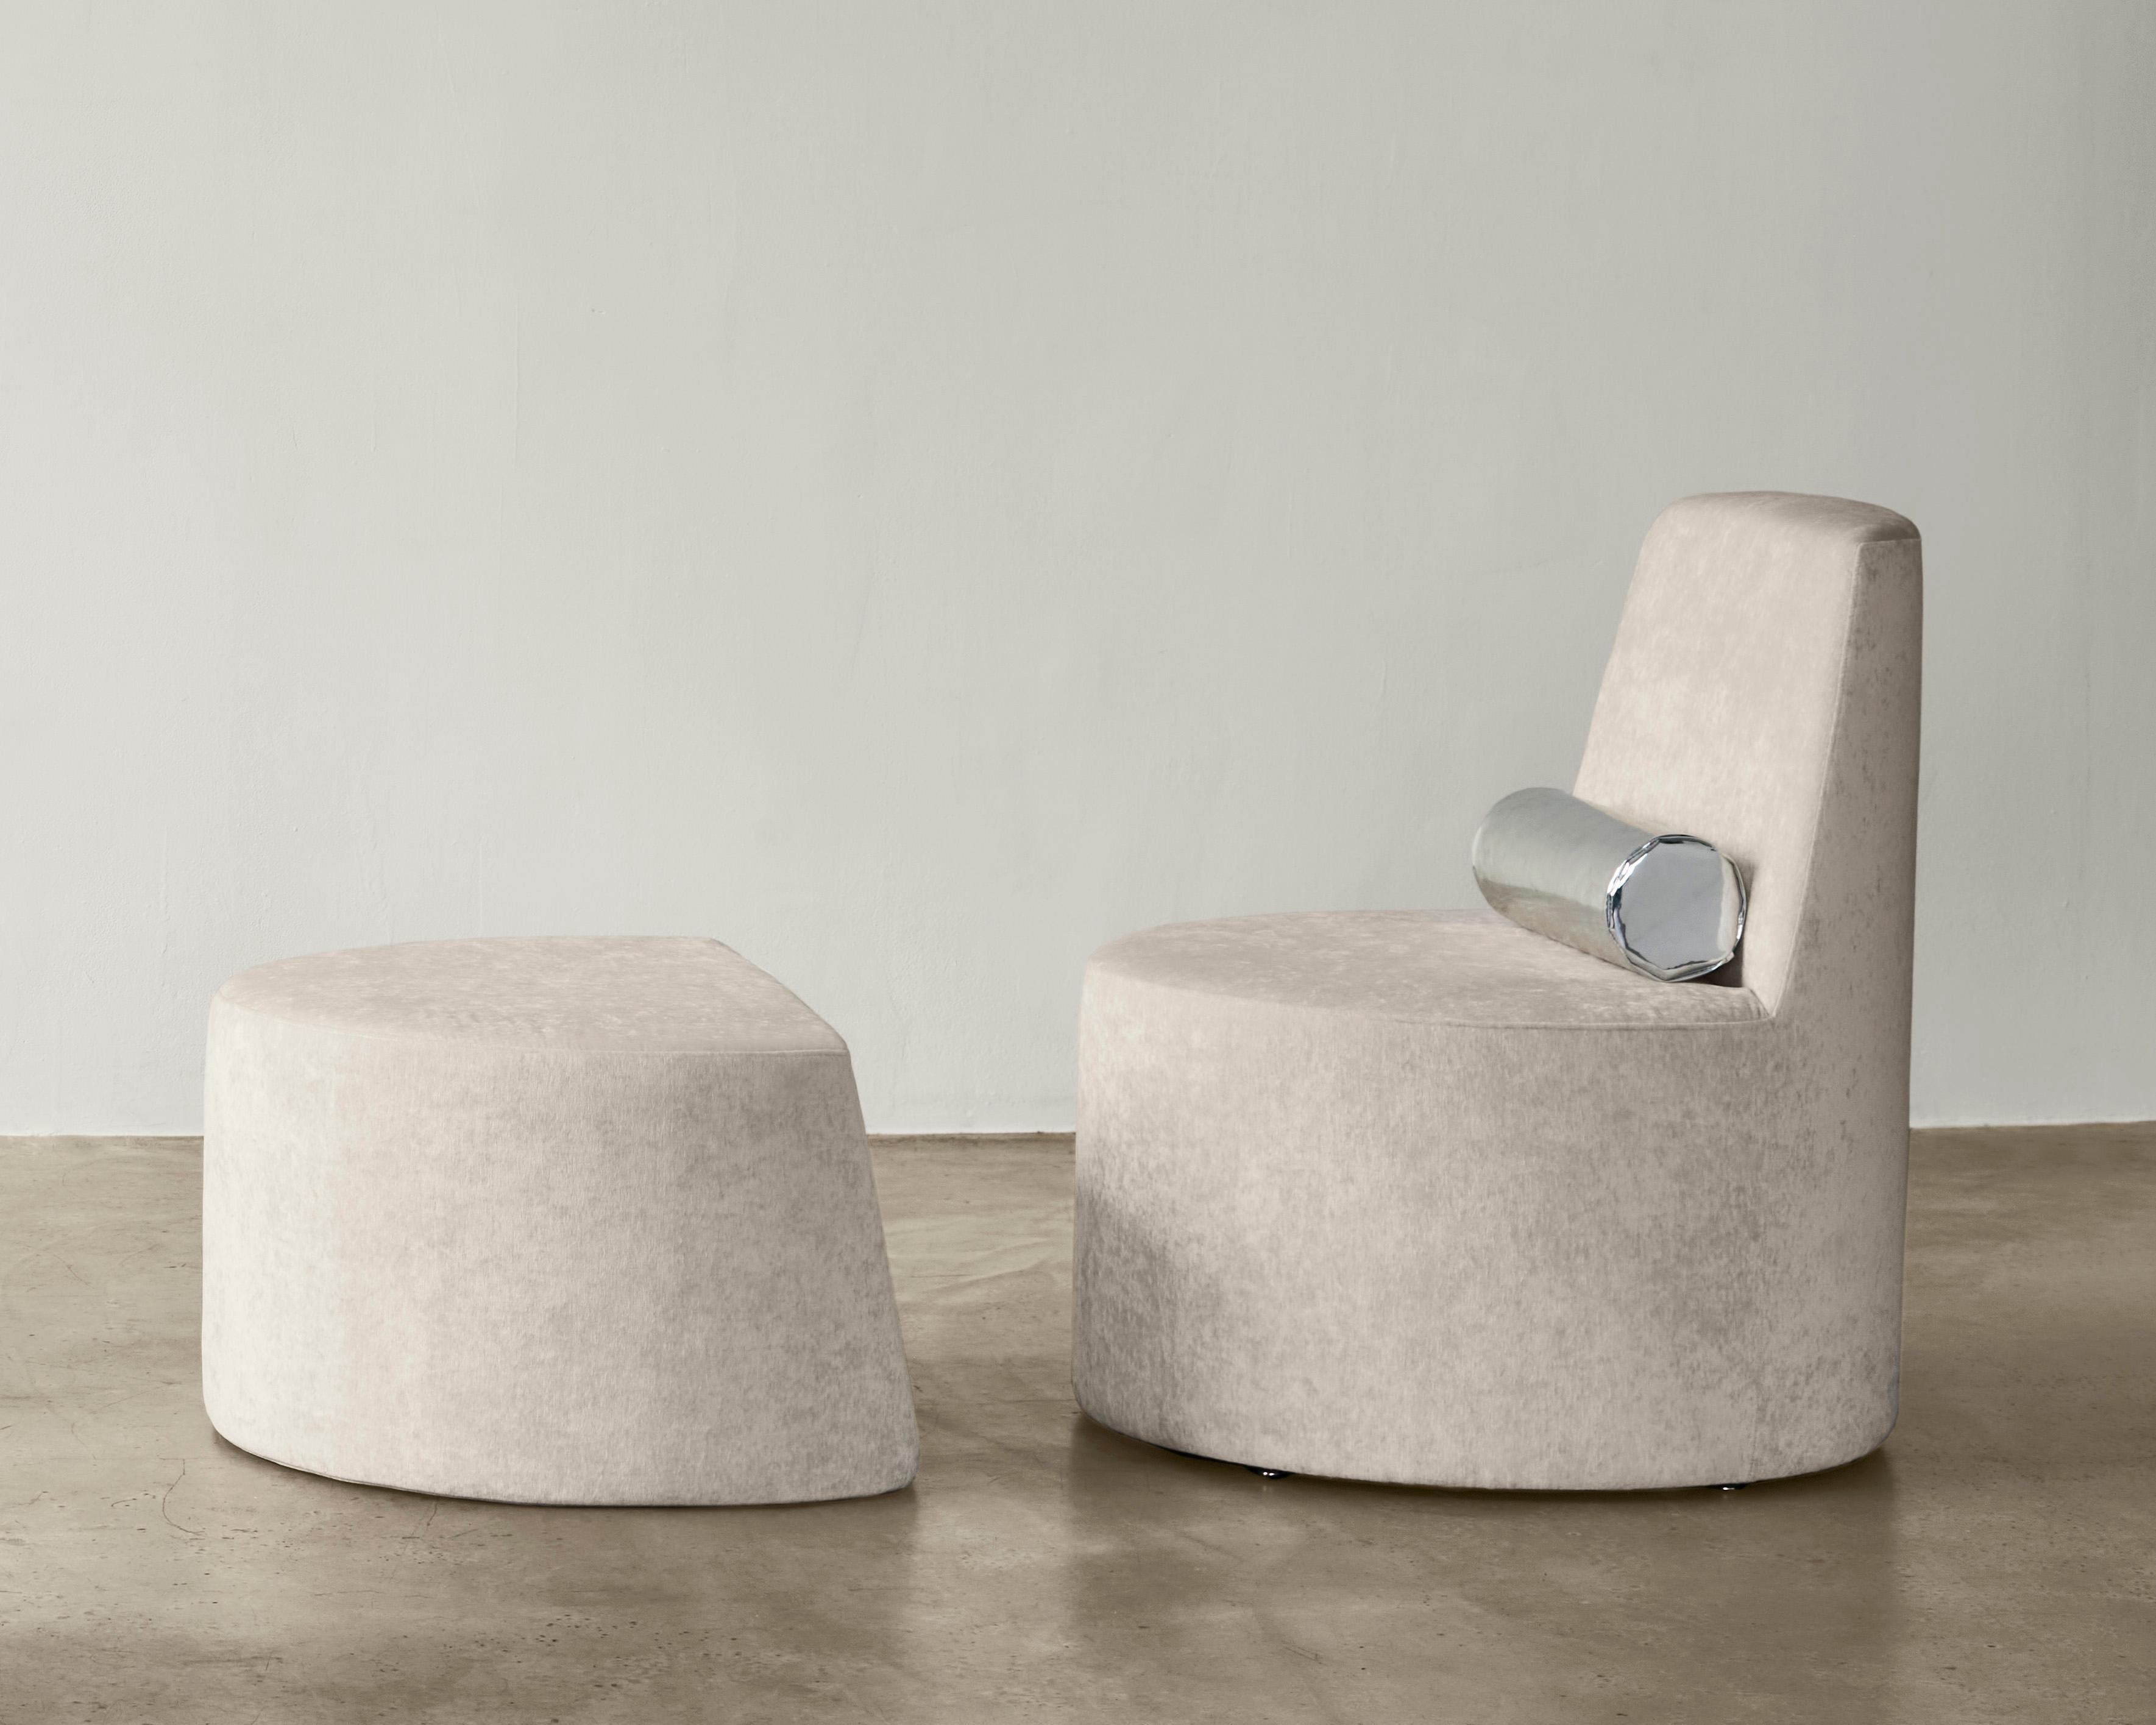 As seen in: Sight Unseen, Interior Design Magazine, Surface Magazine

BLOC Cylinder Lounge Chair & Ottoman Set is part of a five-piece collection of sculptural upholstered and mixed-material furniture. BLOC Collection draws inspiration from familiar